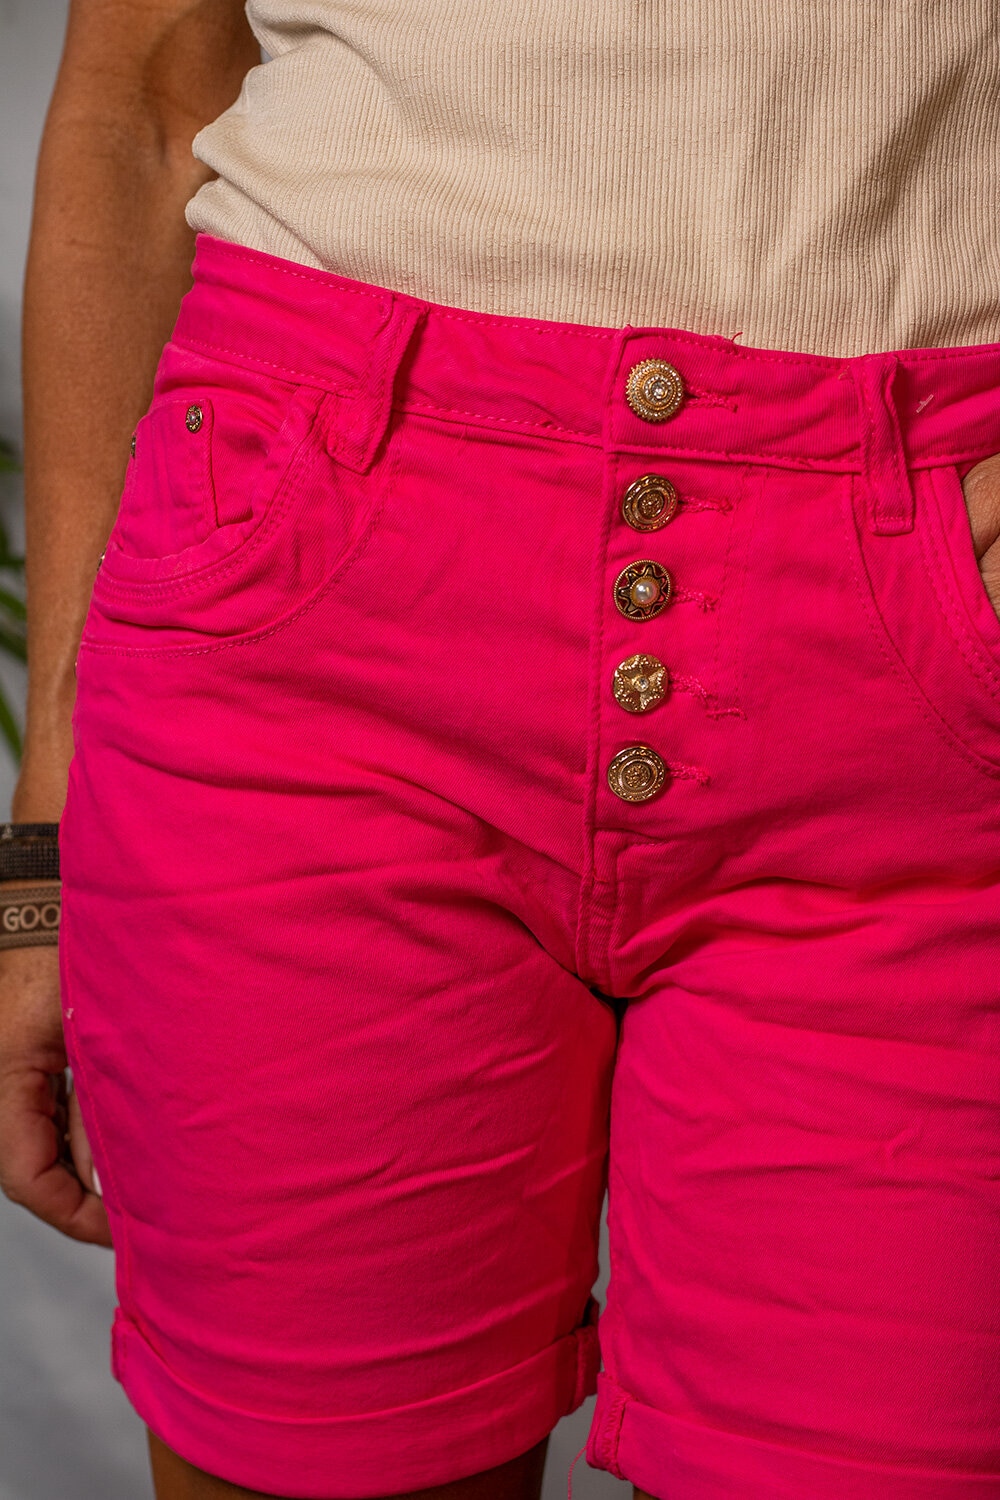 Shorts 1859 - Gold Buttons - Cerise